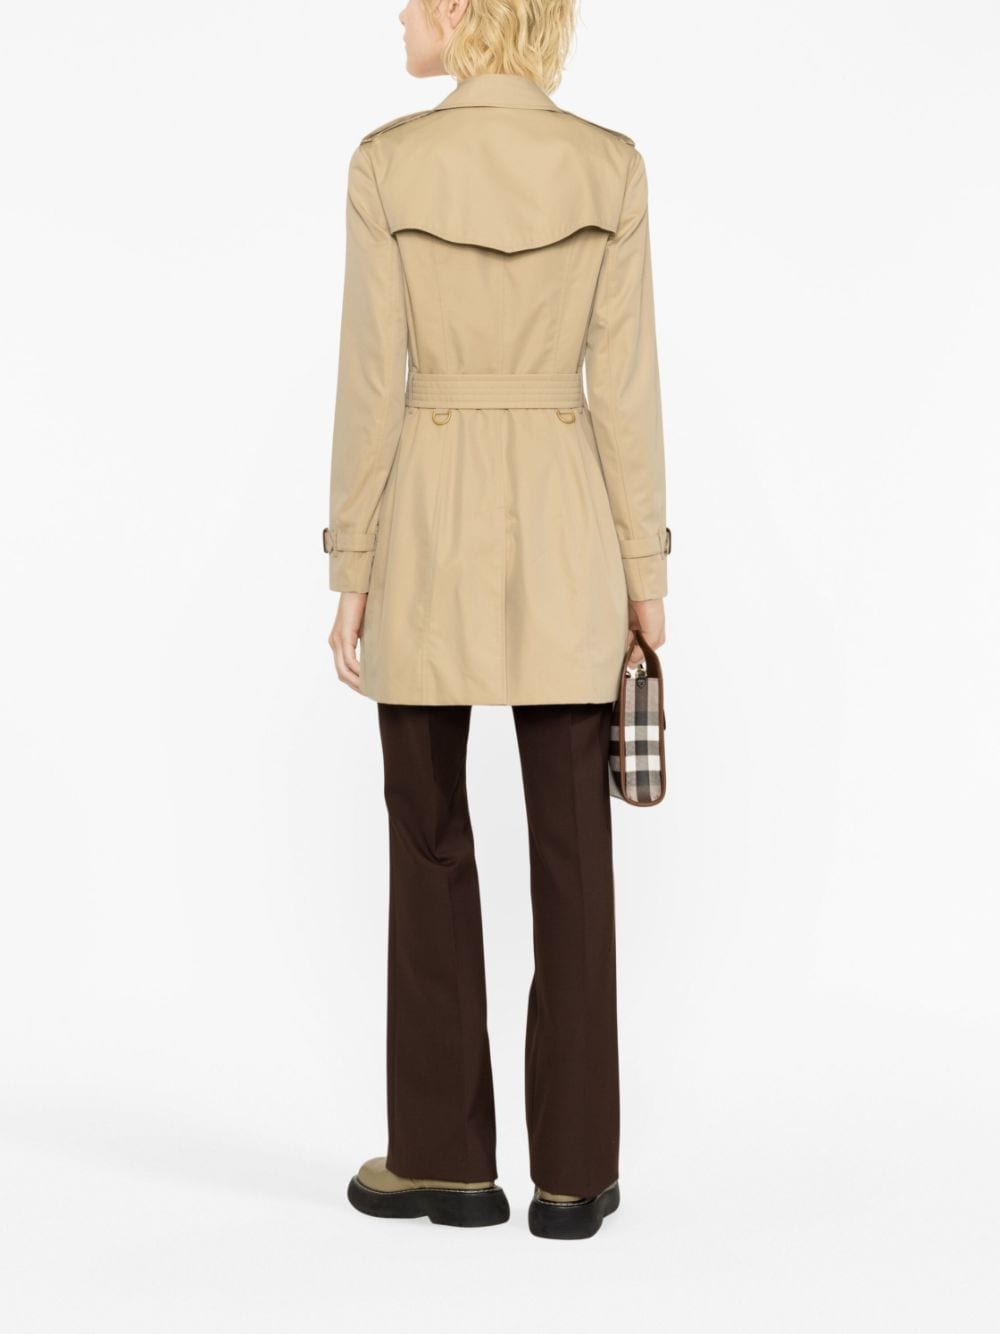 BURBERRY Classy Cotton Trench Jacket for Women in Beige - FW23 Collection